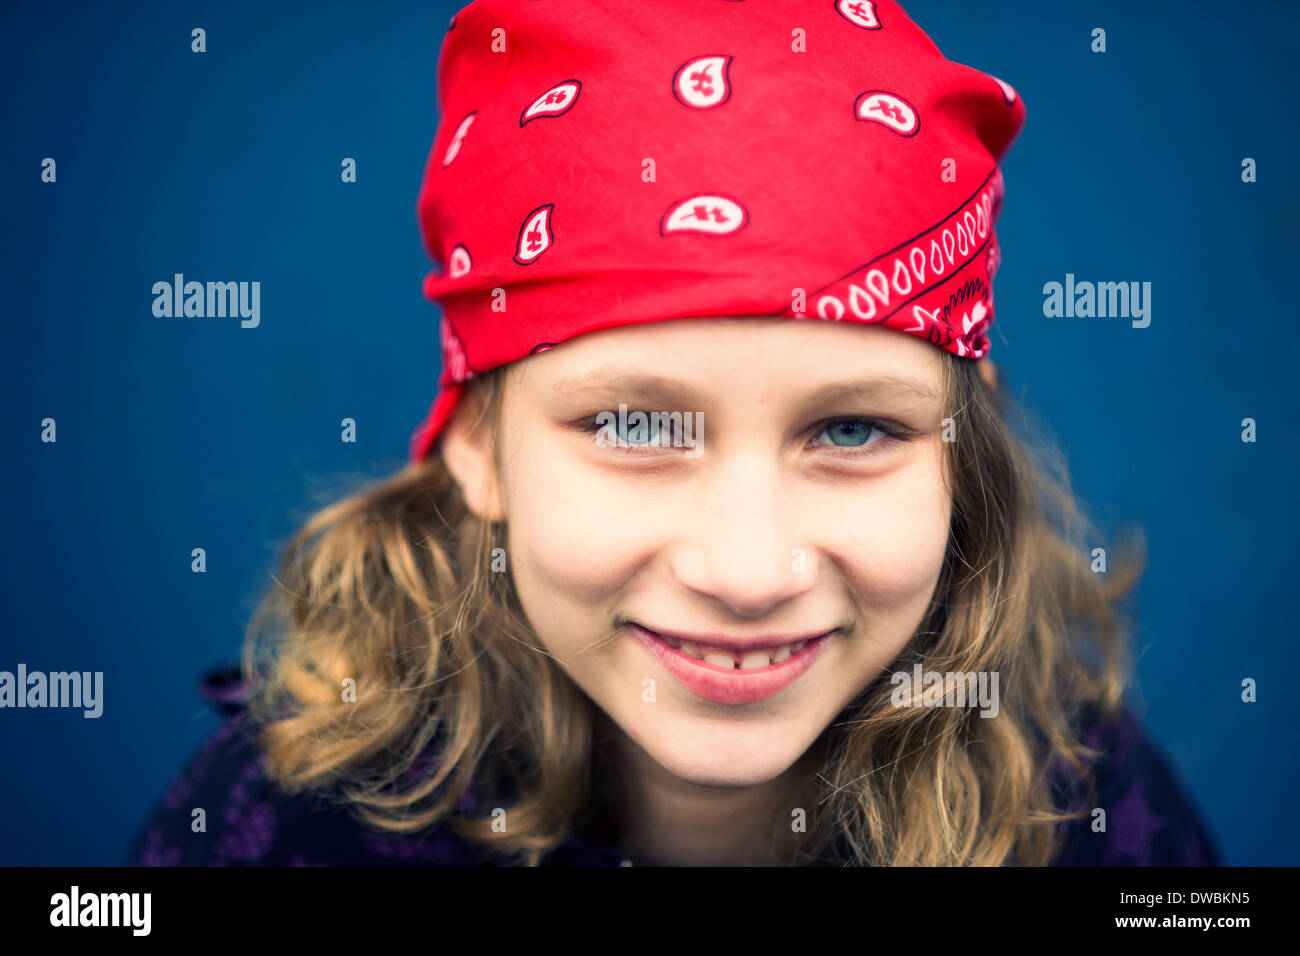 Portrait of smiling girl with red headscarf Stock Photo